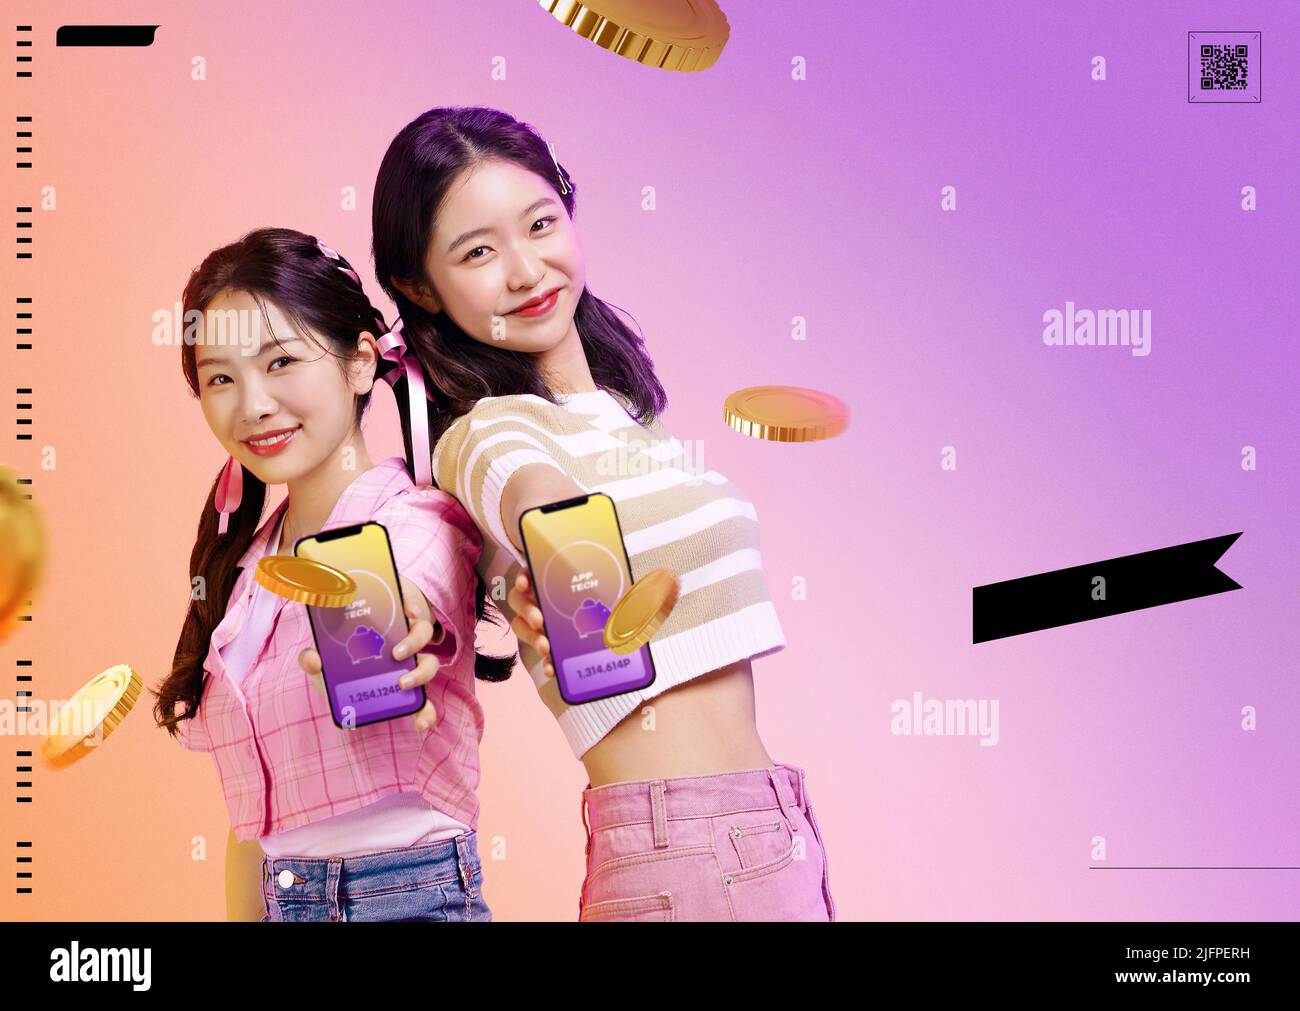 Z generation poster invest in stocks, two Korean girls with mobile phone apps Stock Photo